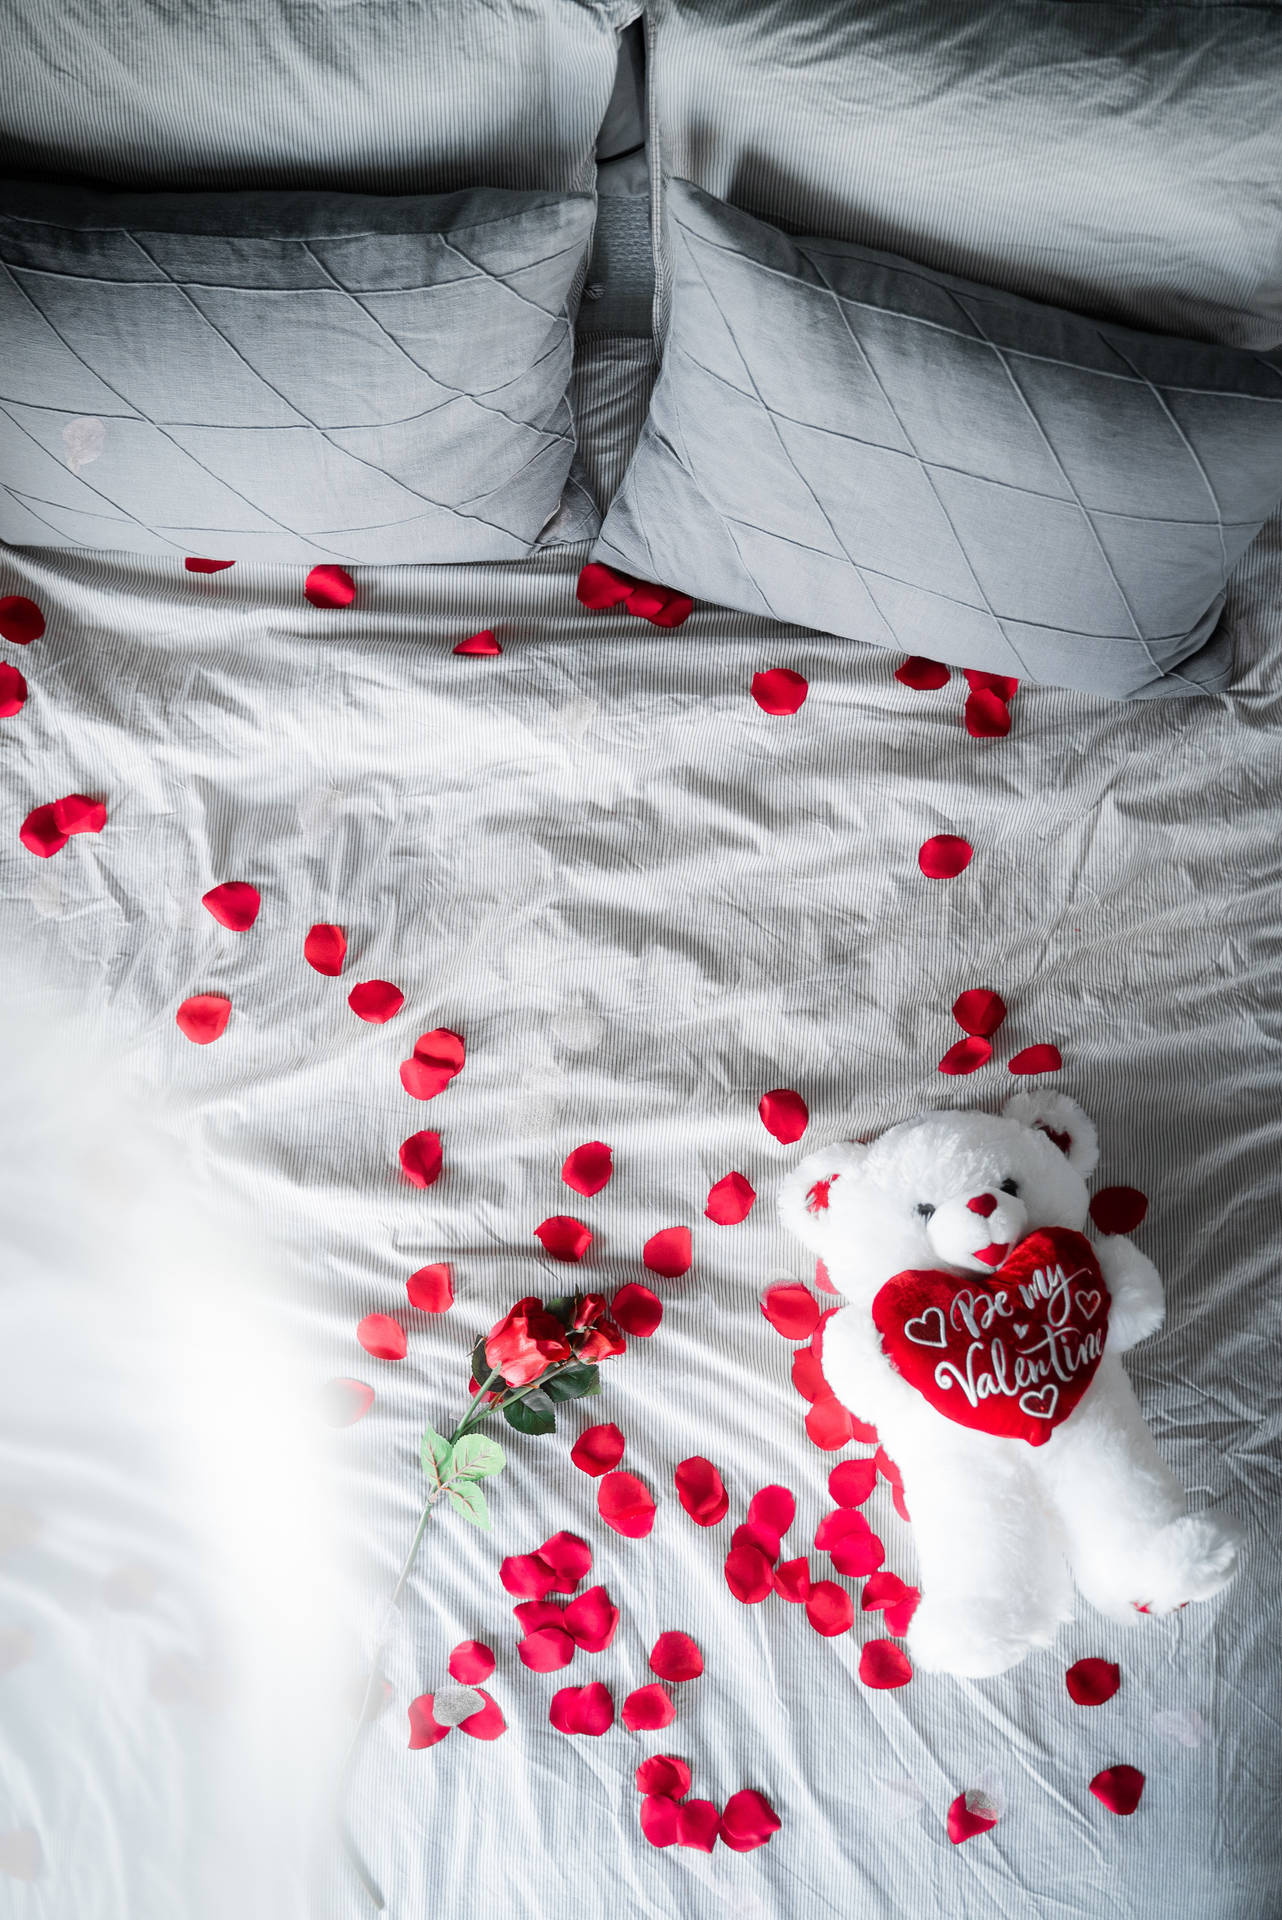 Valentines Bed Of Roses Wallpaper